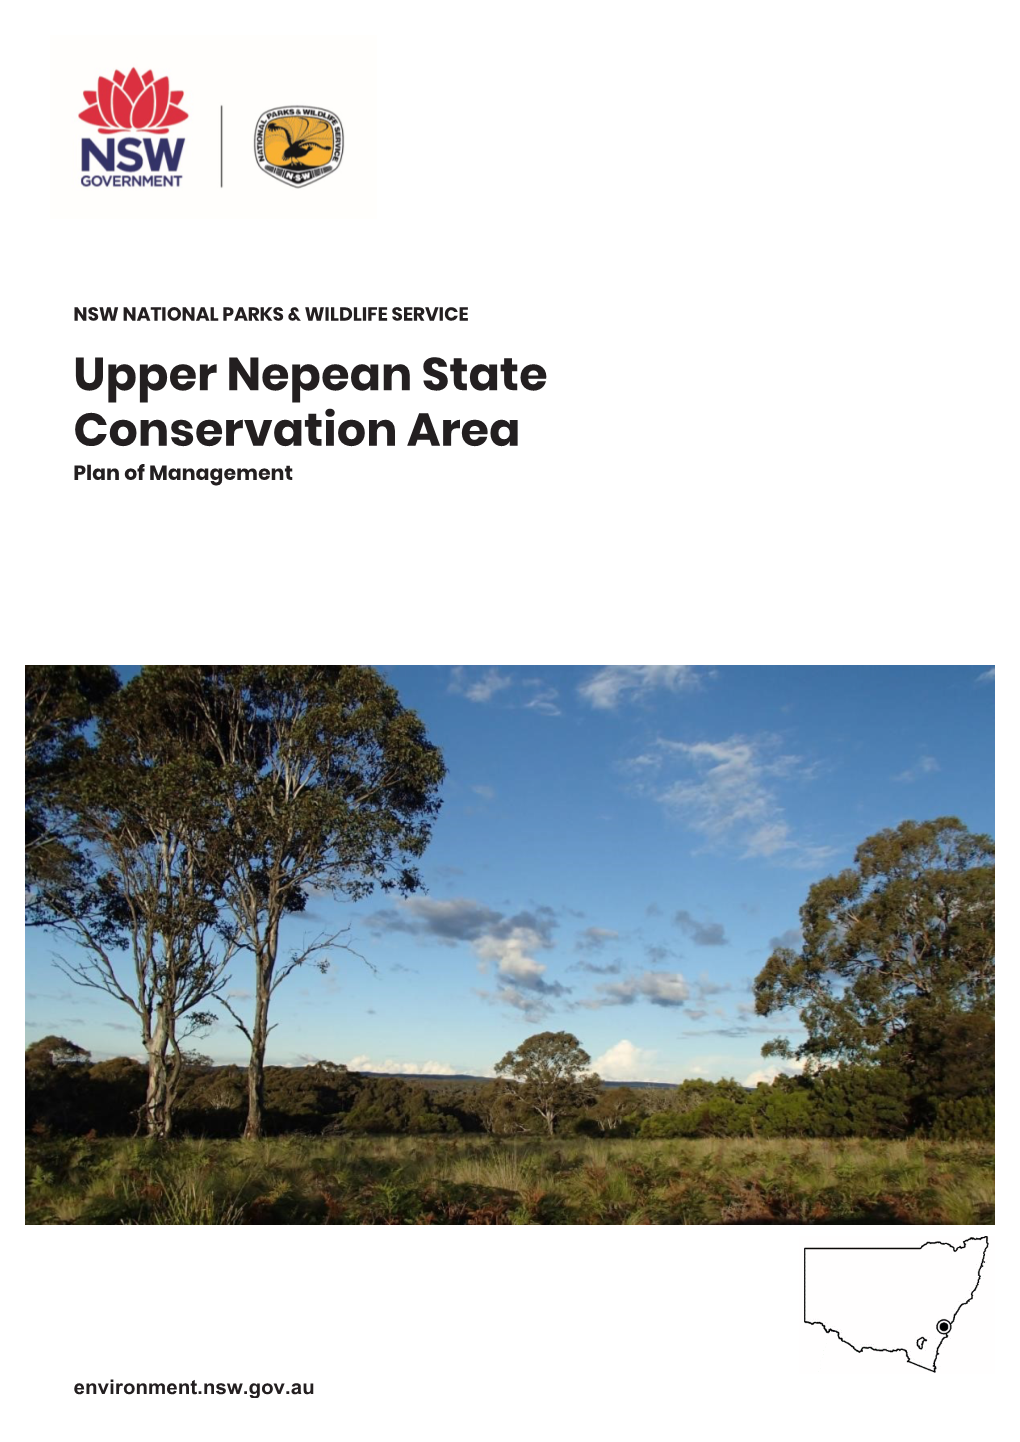 Upper Nepean State Conservation Area Plan of Management